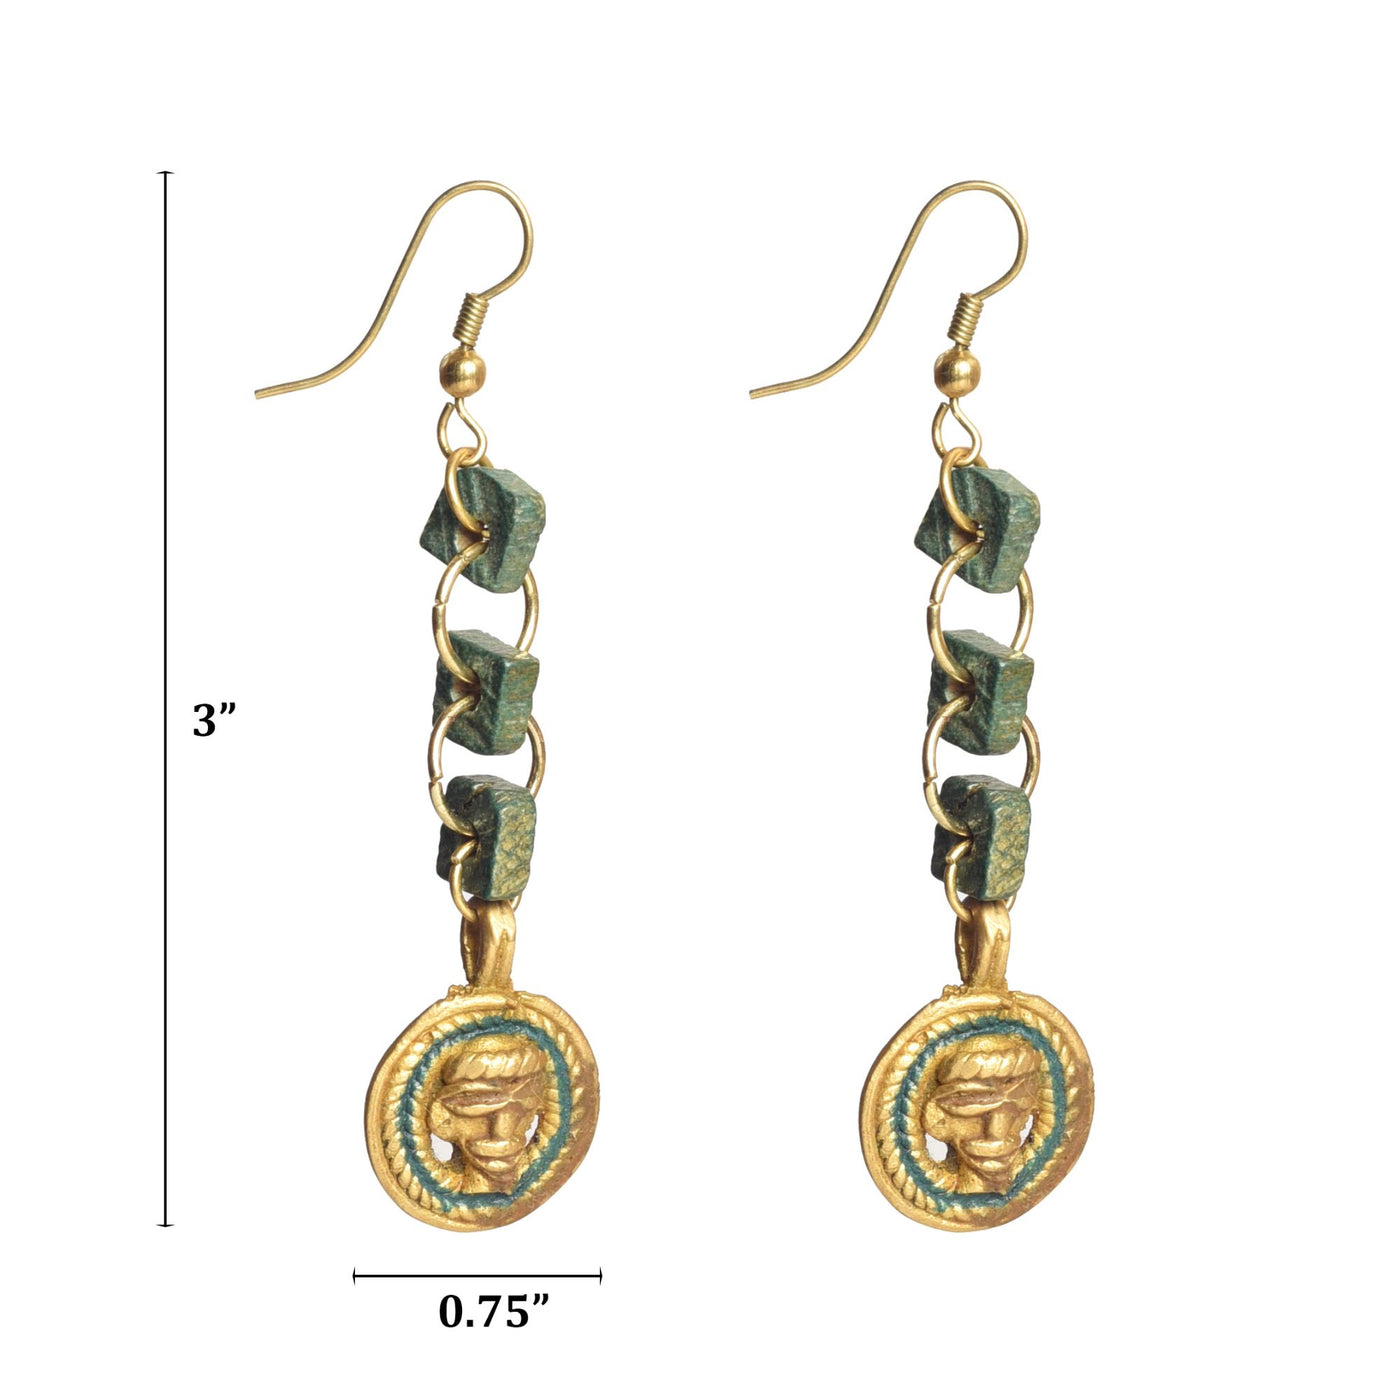 The Olive Queen Handcrafted Tribal Earrings - Fashion & Lifestyle - 5